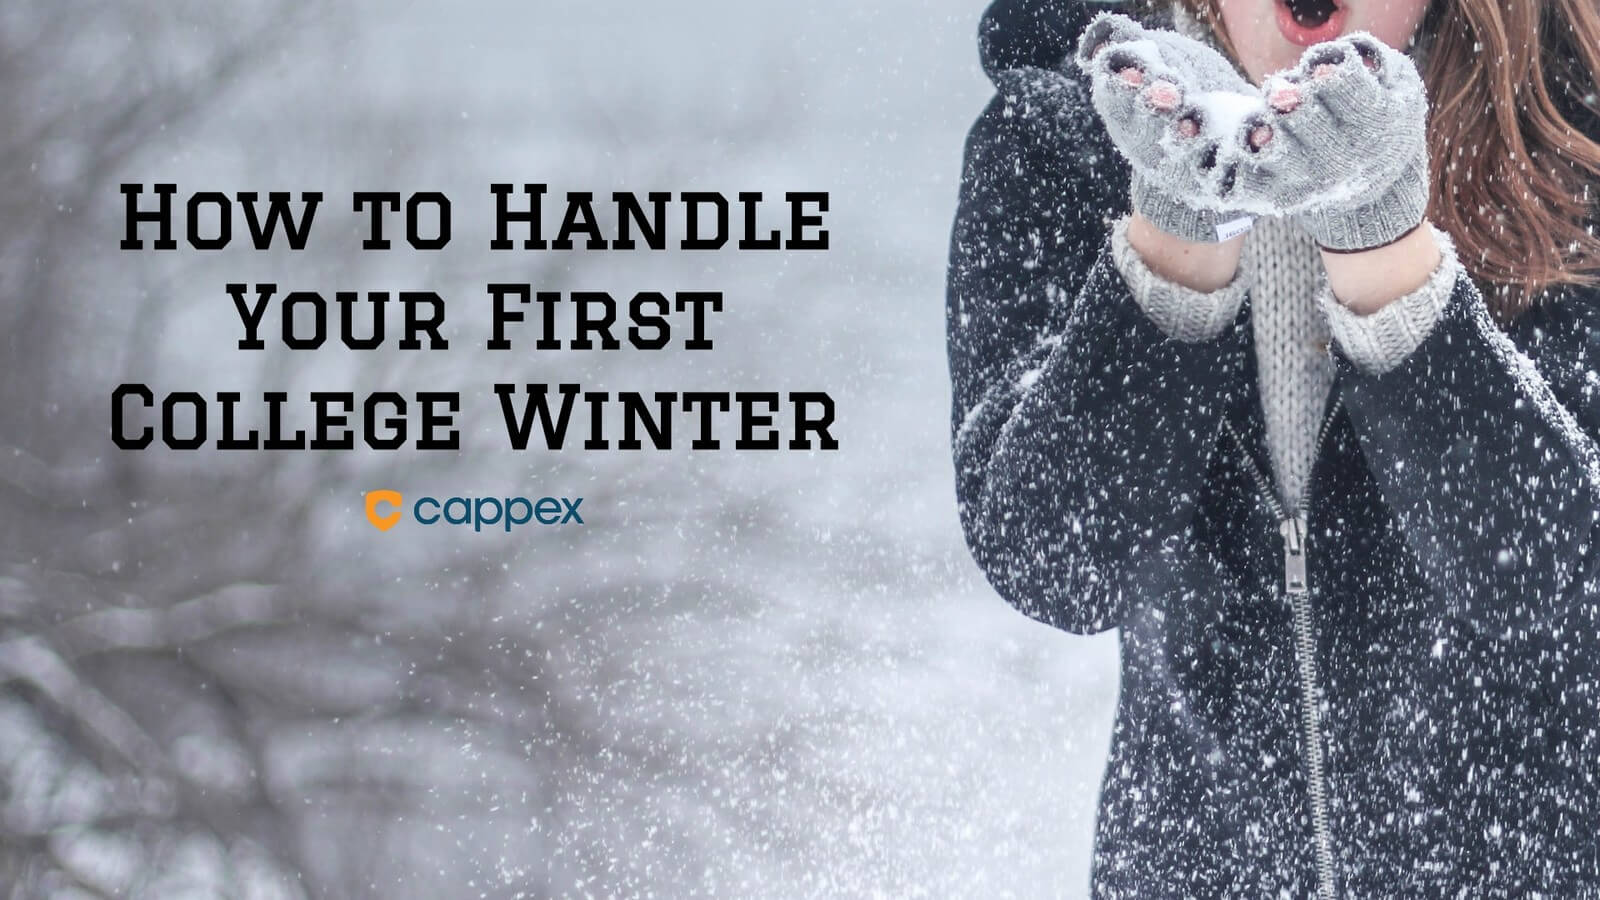 How to Handle Your First College Winter